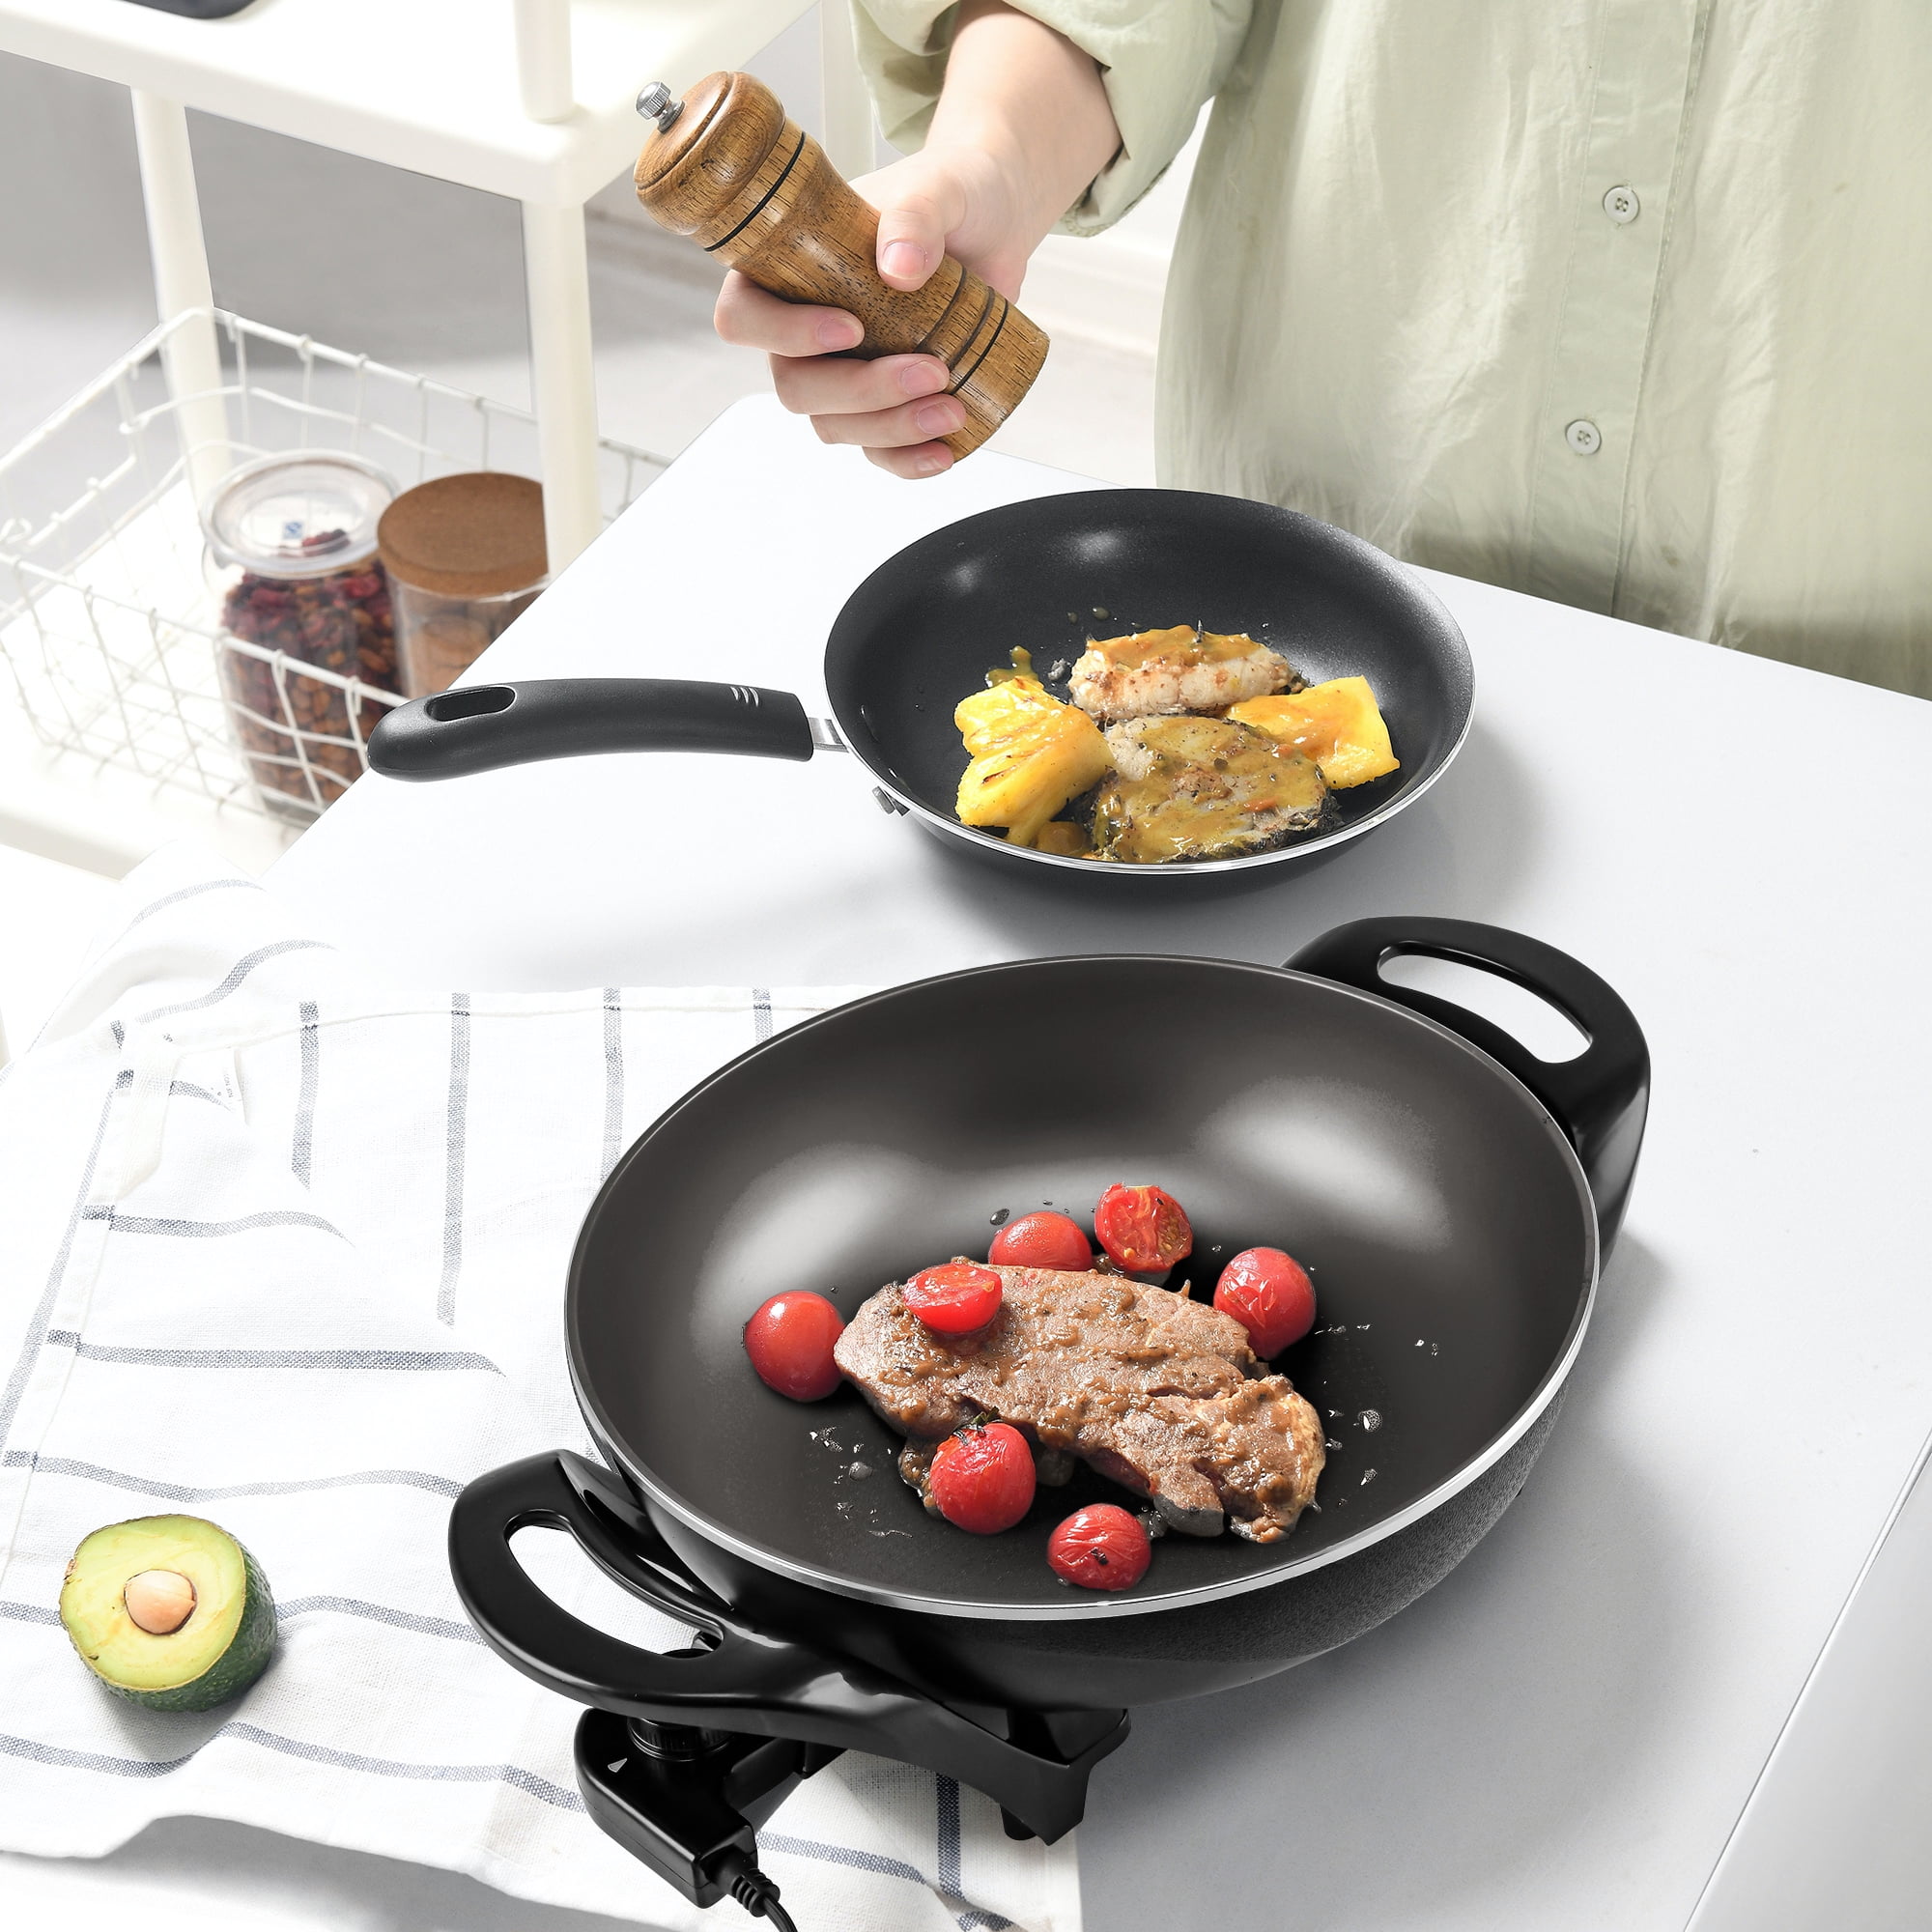 OVENTE 113 Sq. In. Copper Electric Skillet with Nonstick Coating